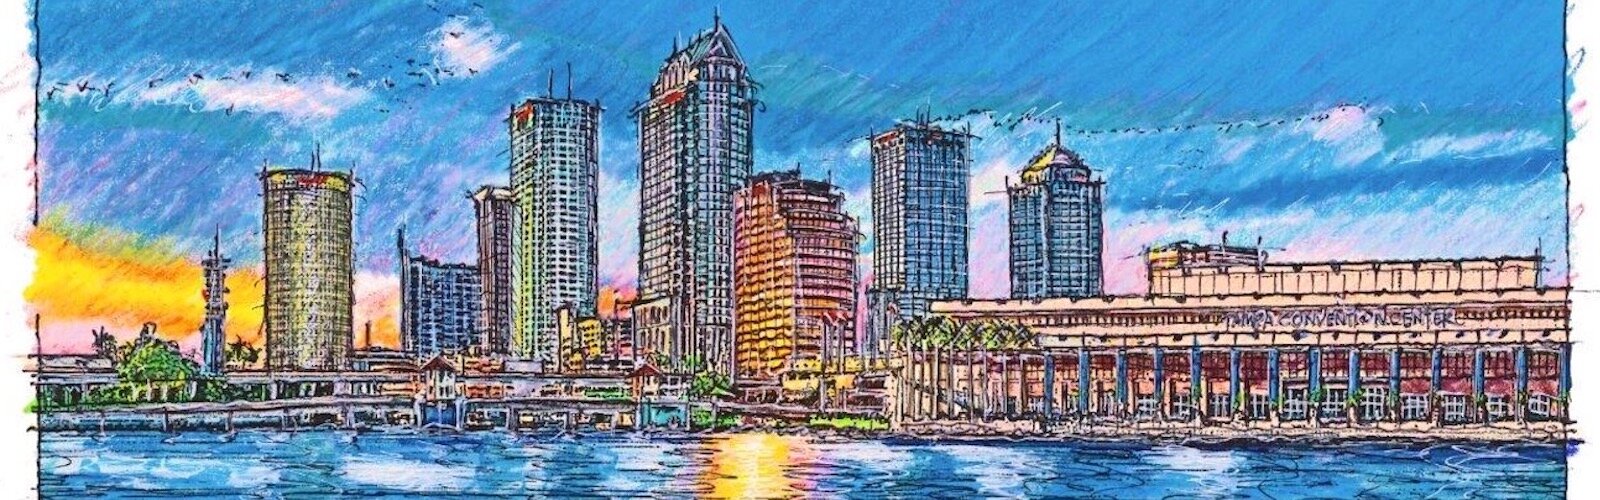 Downtown Tampa skyline sketched by John Pehling.